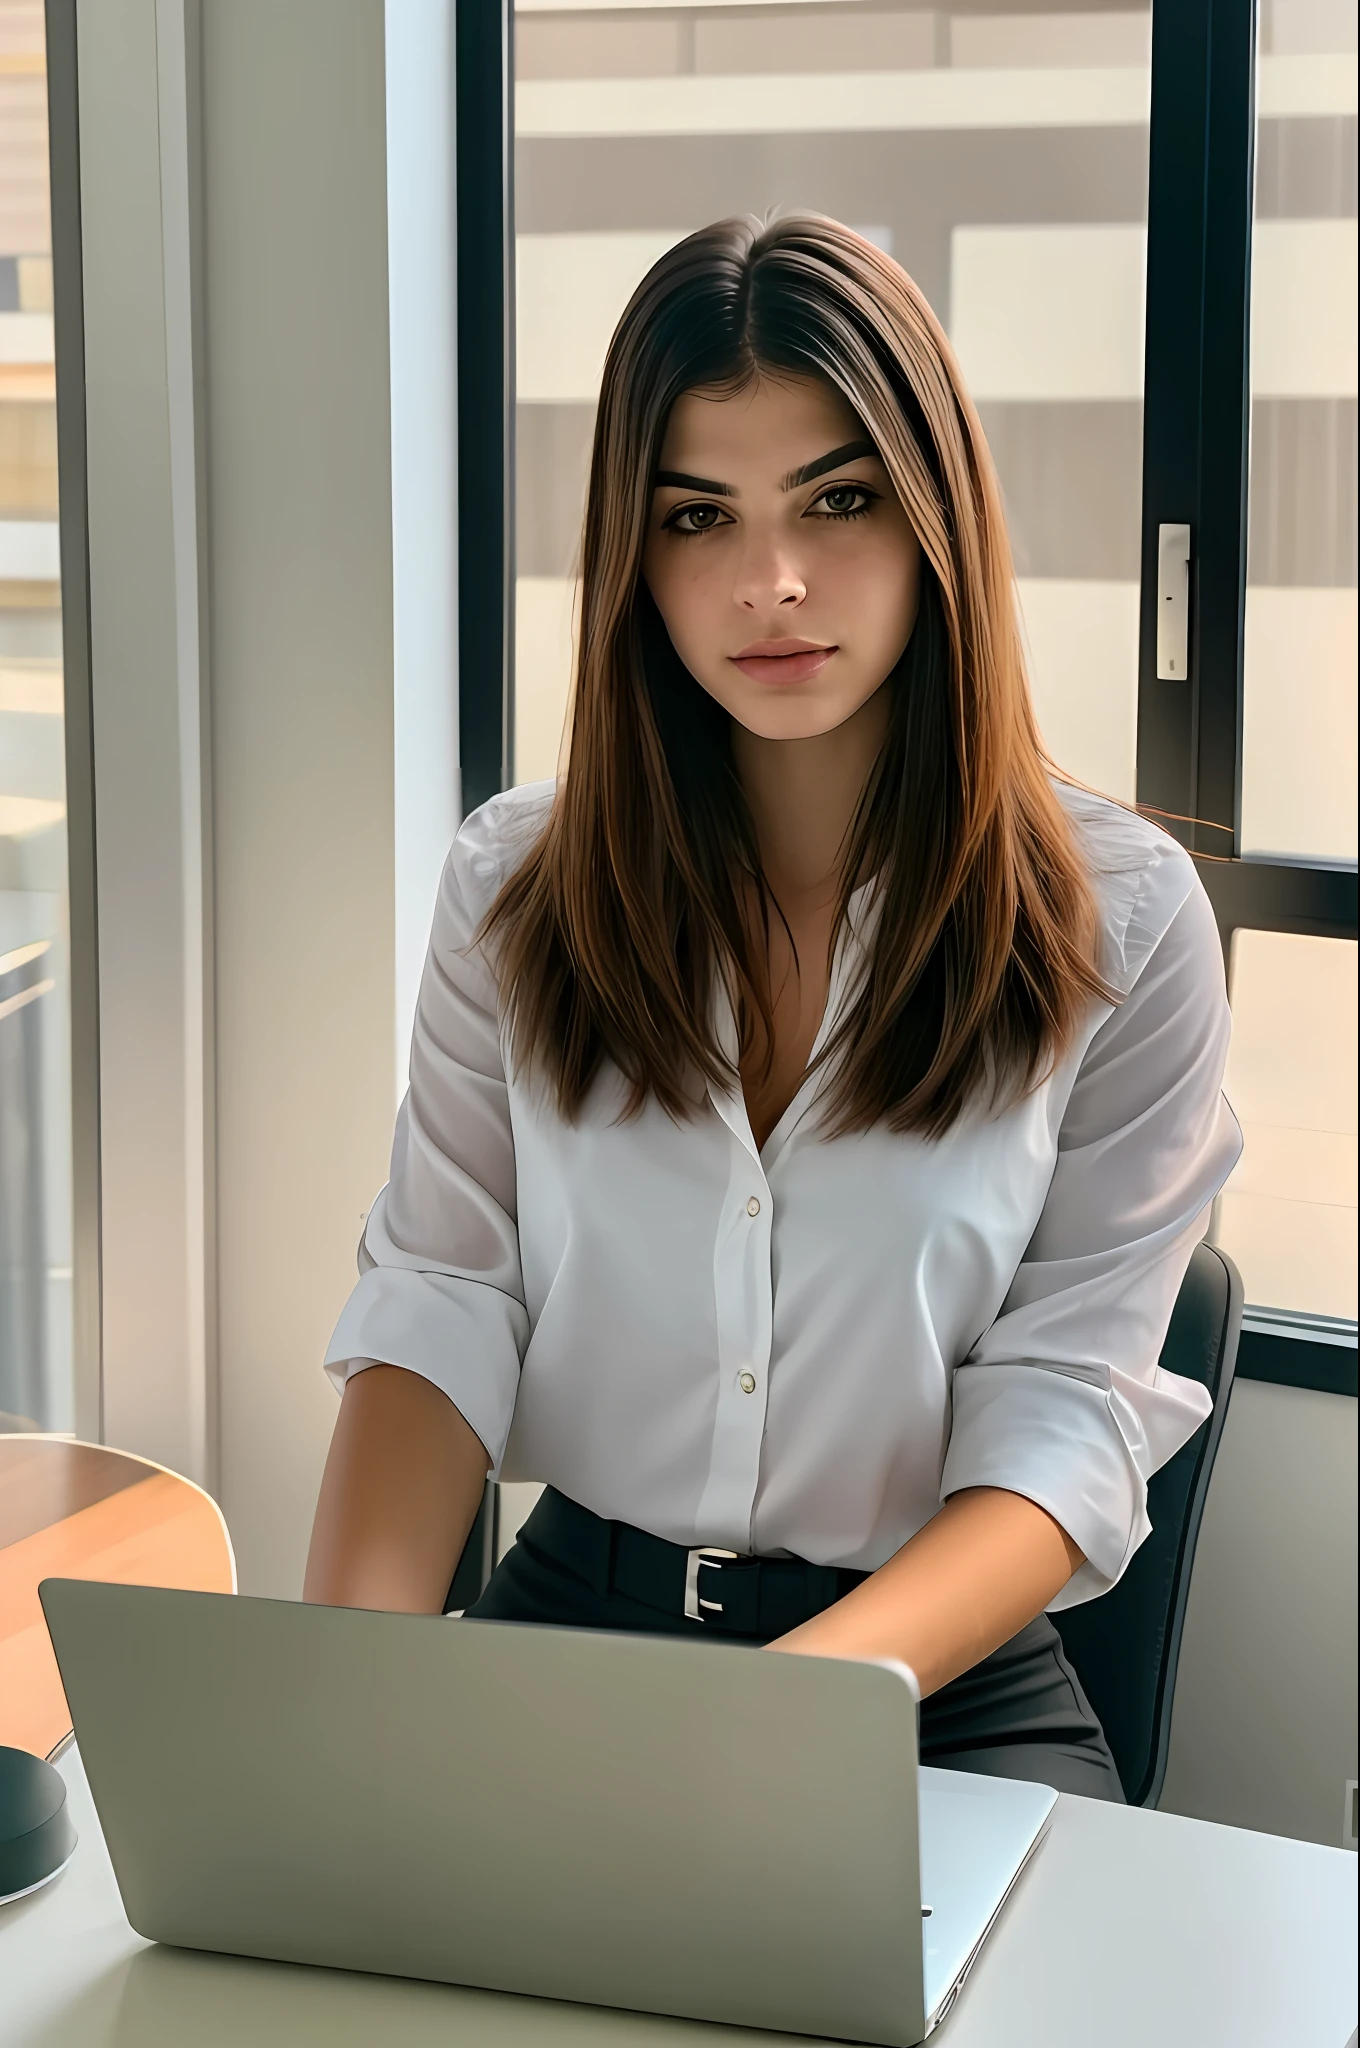 (sharp focus:1.2), photoshot, beautiful 23 year old girl, (beautiful  face:1.1), detailedeyes, lush lips, (cat eye makeup:0.85), (wavy hair), (hair blonde), (Caucasian female), using (white female social suit) woman sitting at a desk with a laptop and papers, working on his laptop, in front of a computer, sitting down em frente ao computador, working on a laptop at a desk, home office, jovana rikalo, young business woman, typing on laptop, sitting down, creative coder with a computer, (grumpy lighting: 1.2), Depth of field, bokeh, 8K, photoshot realista, super detailed